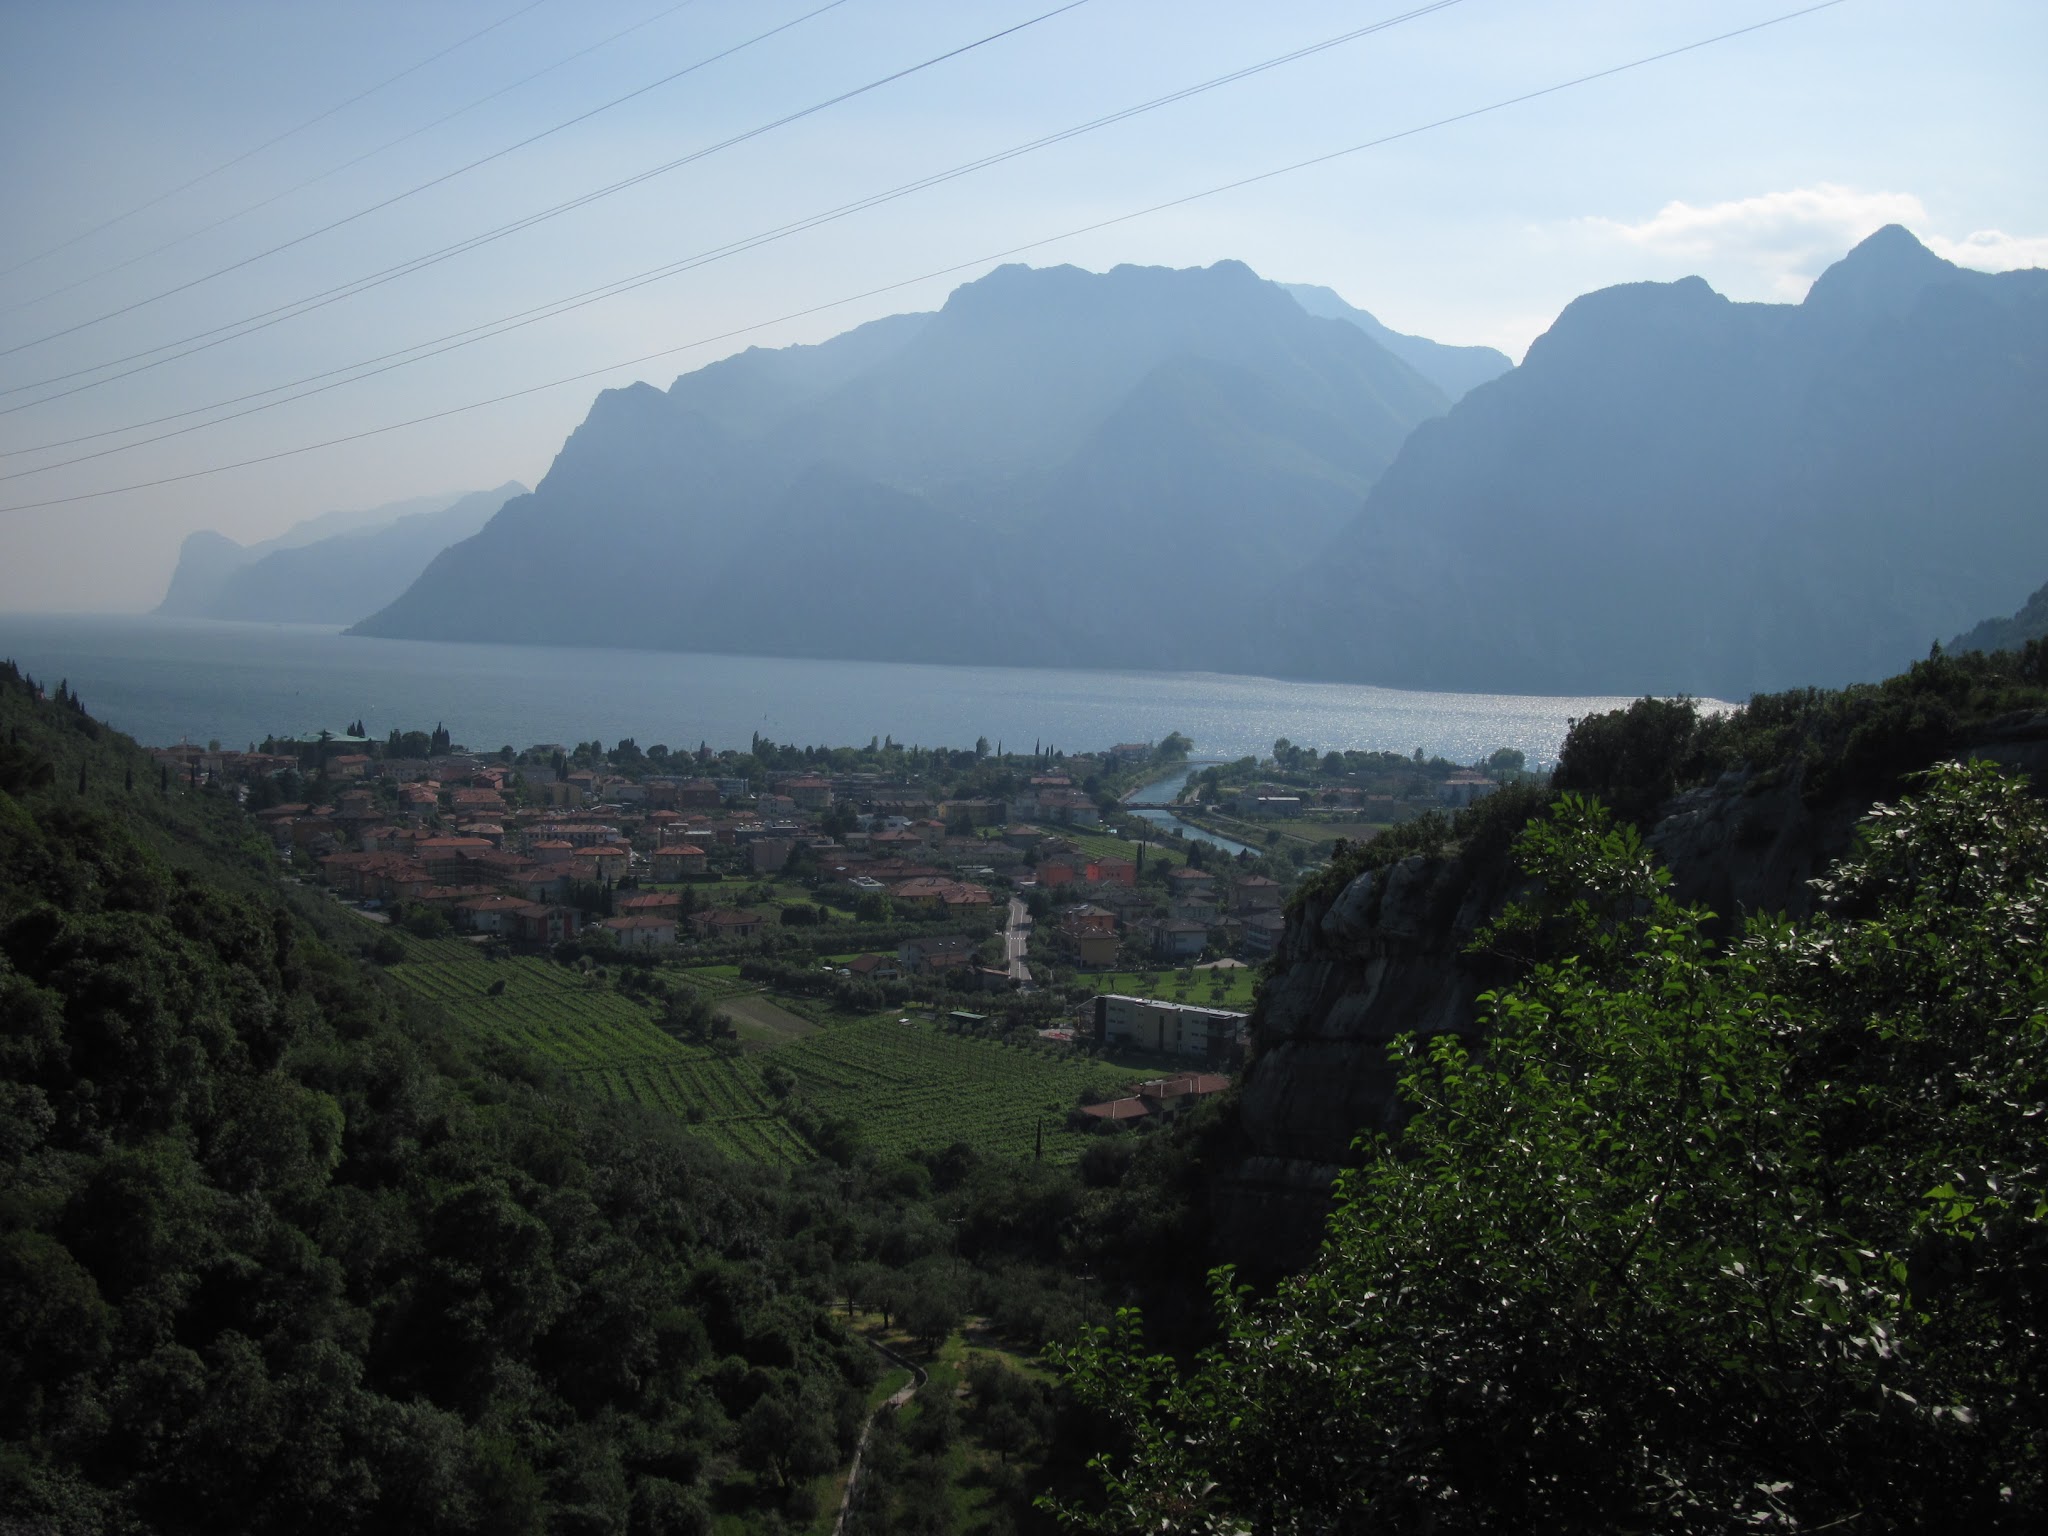 Northern Garda Lake, from the road going down to Torbole from the North